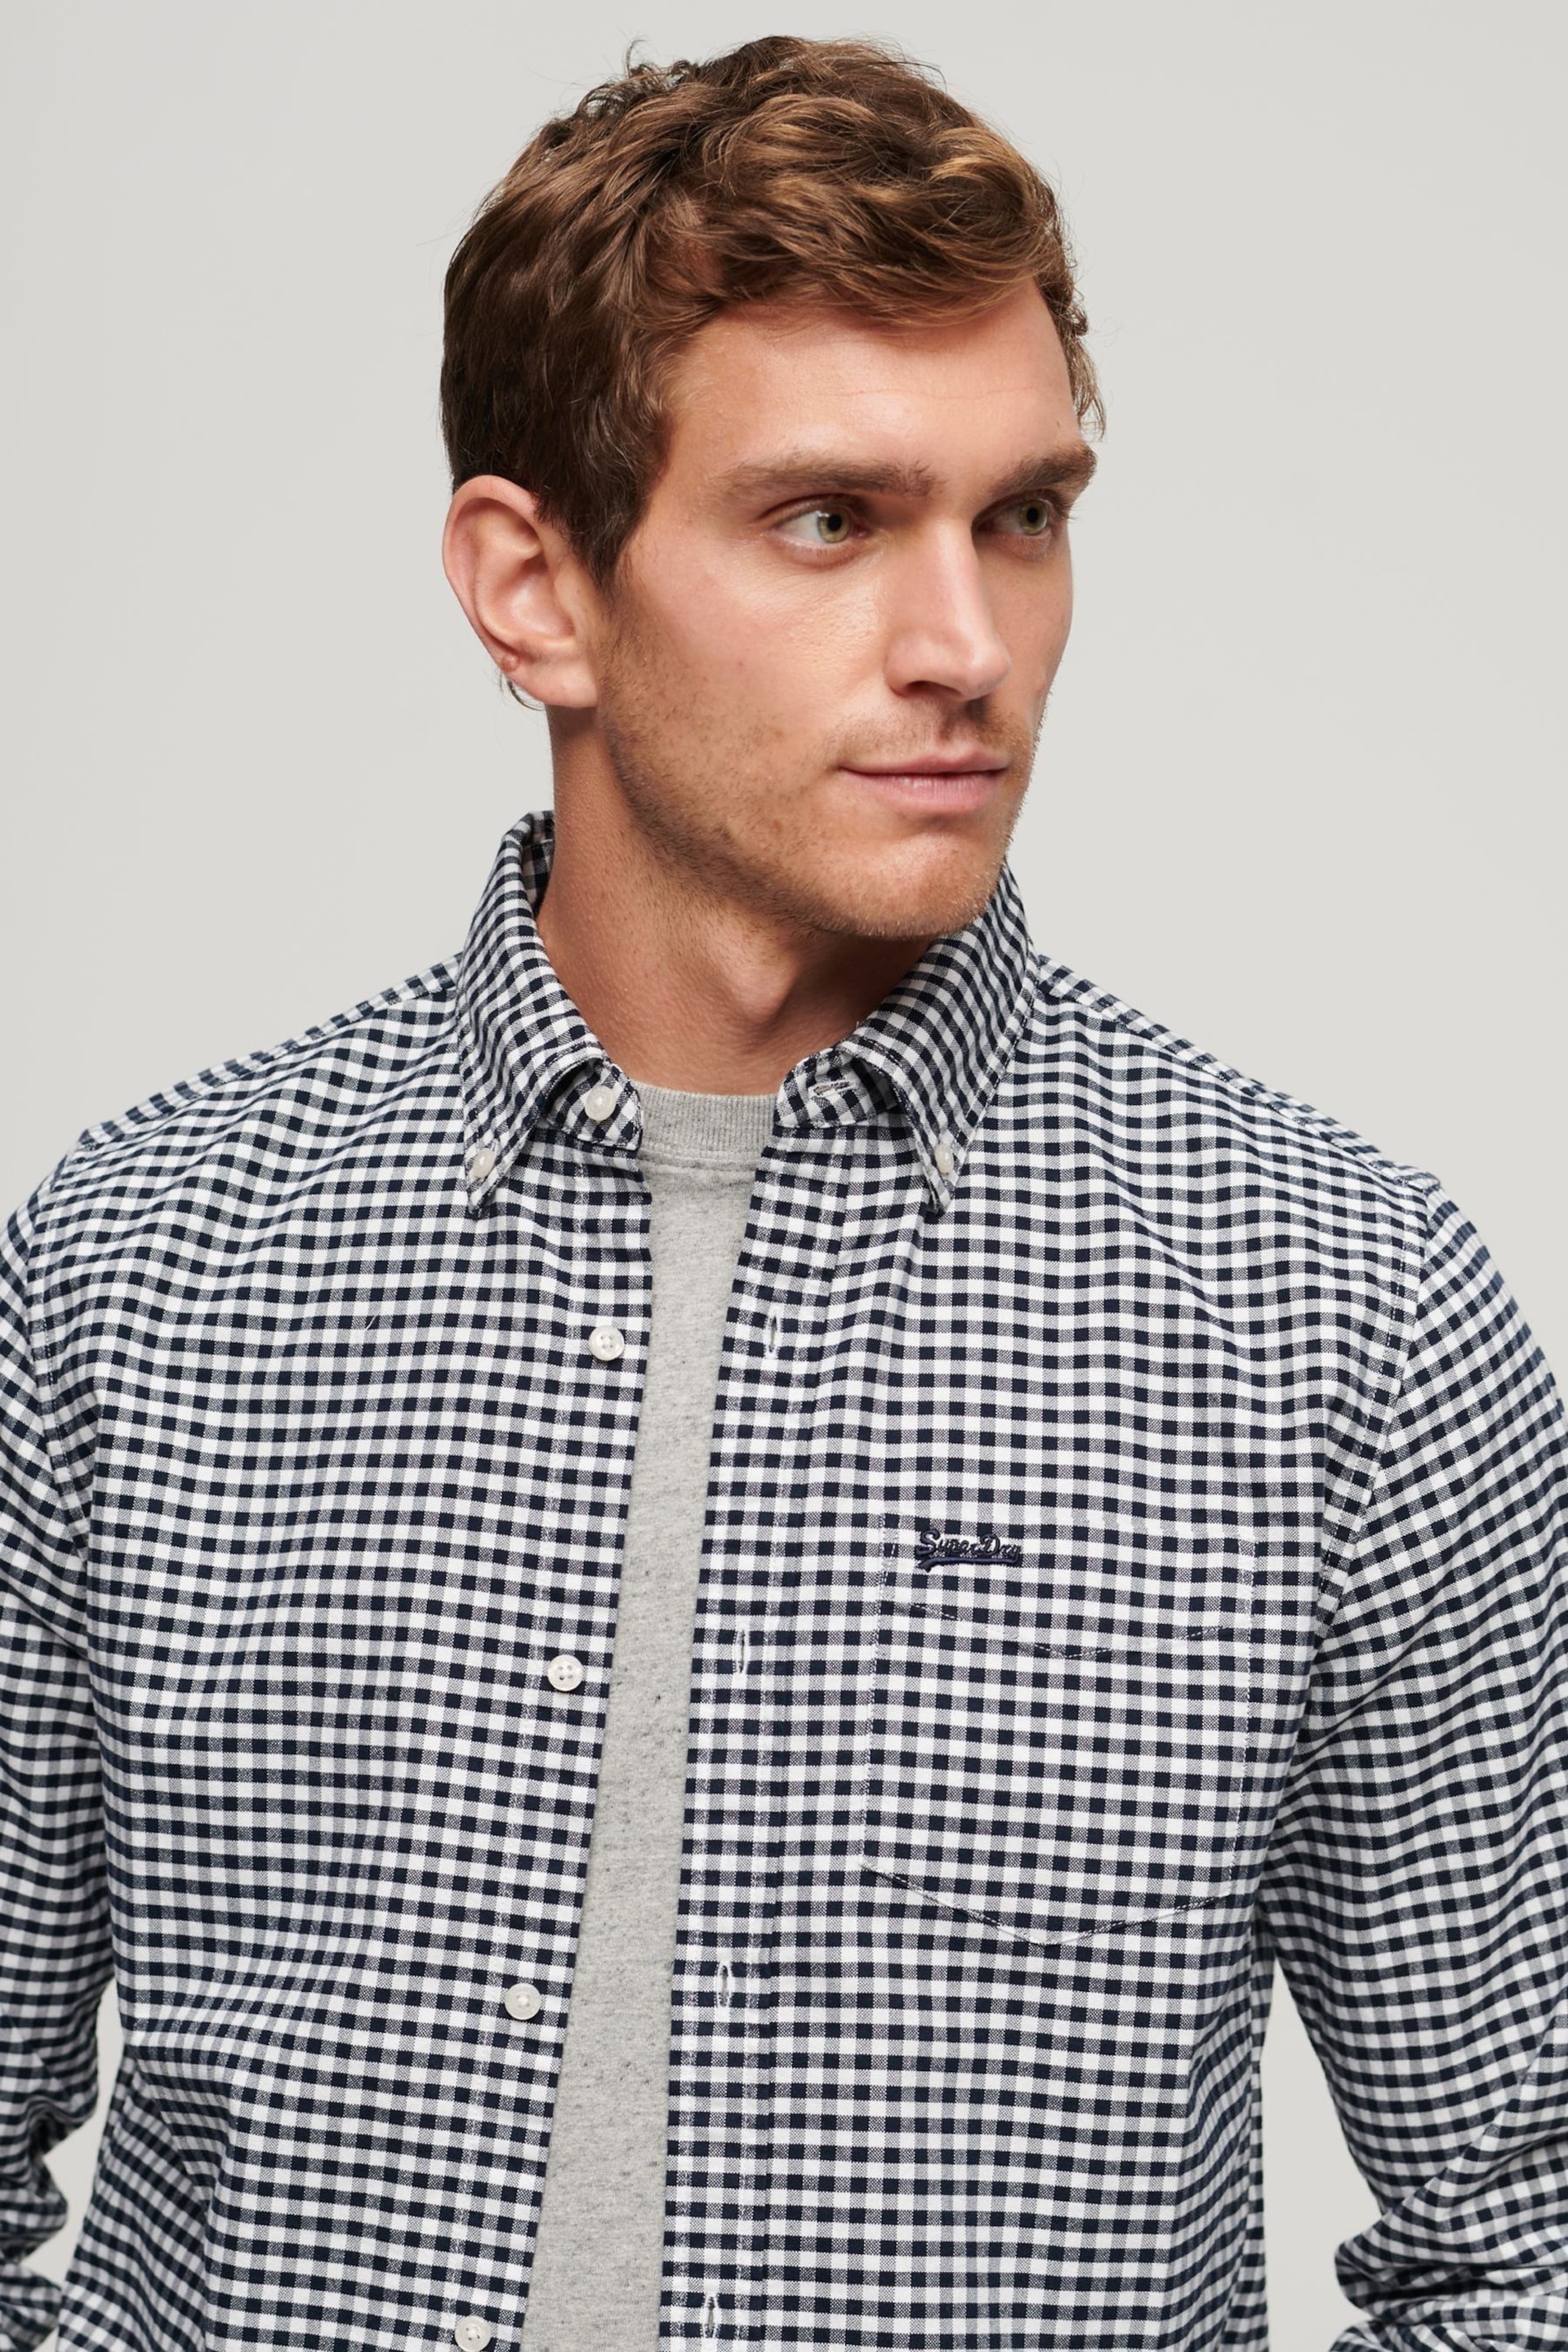 Superdry Black/White Cotton Long Sleeved Oxford Shirt - Image 6 of 7